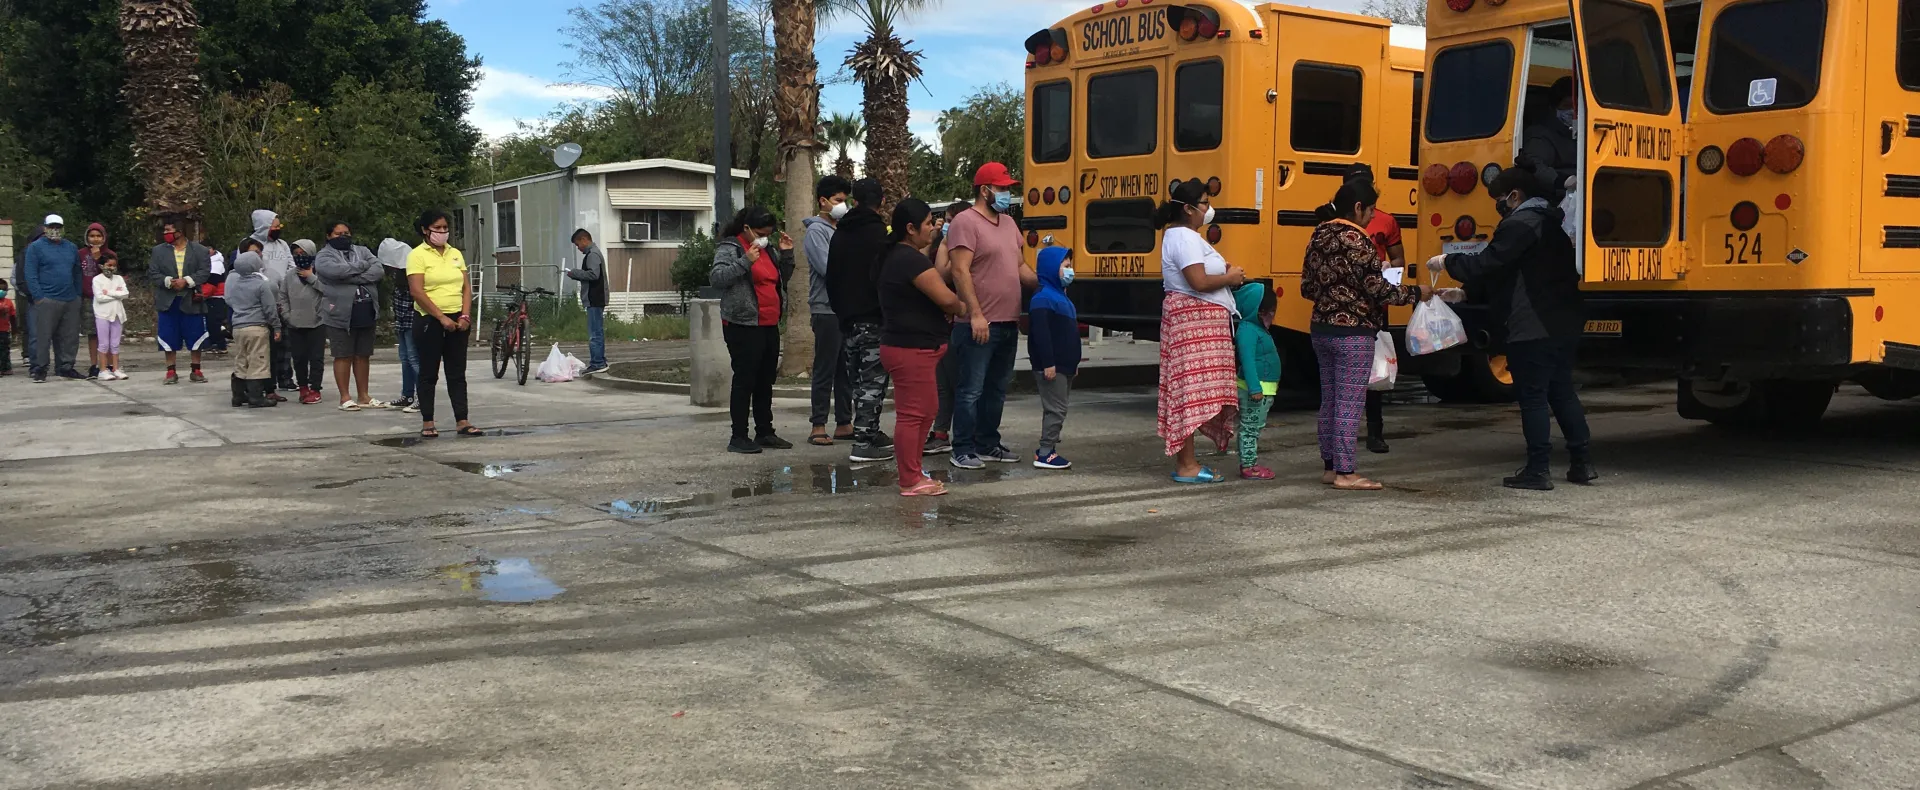 A line of people wait for food in a parking lot behind two school buses.